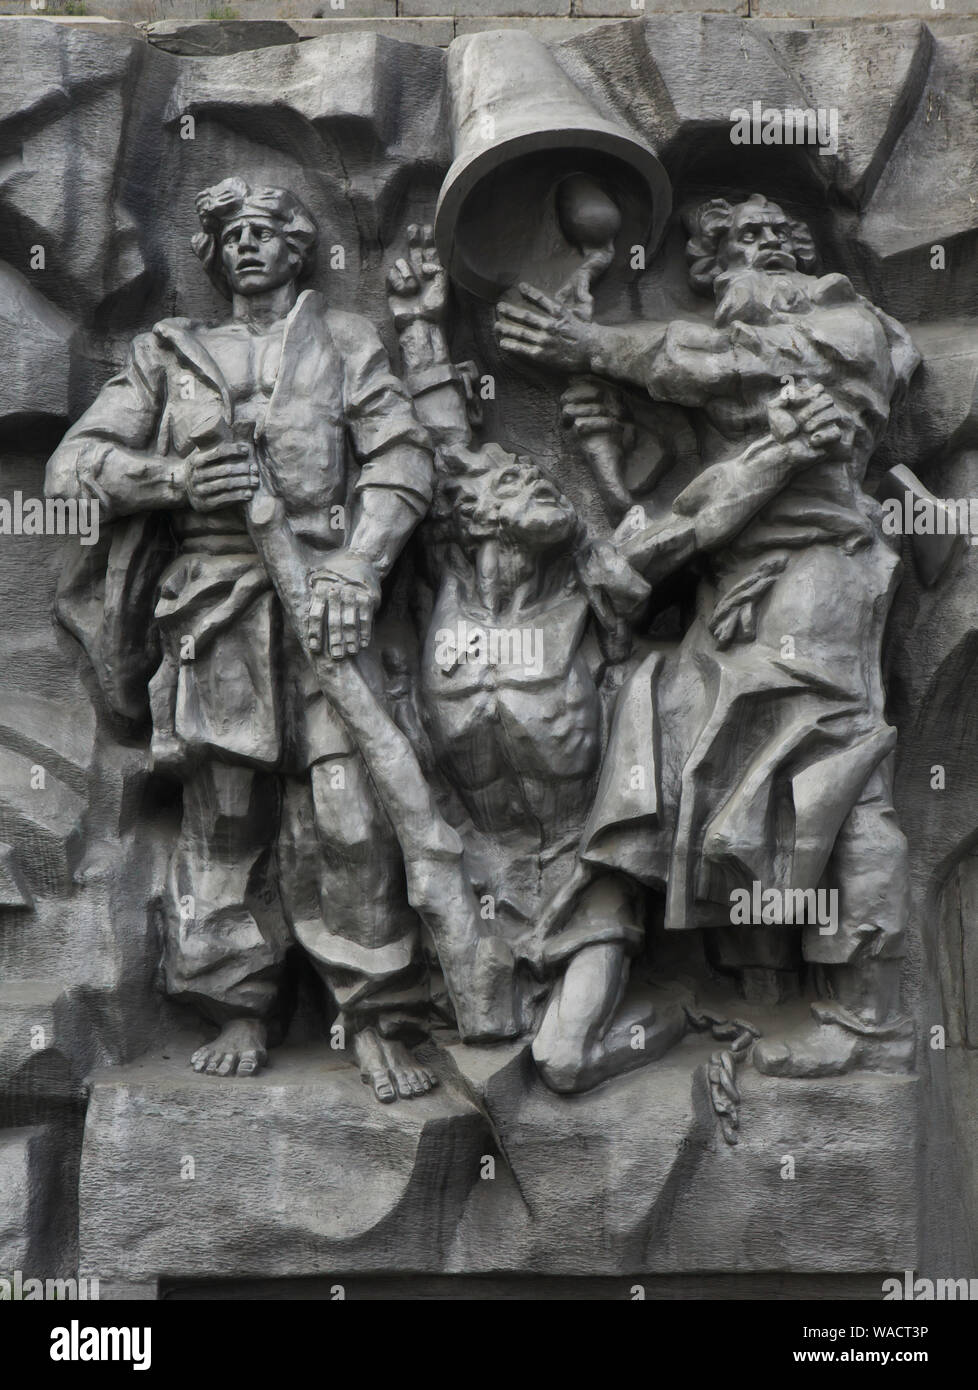 Raskolniki (Old Believers) who worked at the Yekaterinburg iron-making plant depicted in the large scale metal relief entitled 'The Birth of the City' in Yekaterinburg, Russia. The concrete high relief devoted to the history of the city was designed by Russian sculptor Pyotr Sharlaimov and unveiled in 1923 for the first time on the dam of the City Pond (Plotinka). In 1960, the relief was removed and destroyed. It was reconstructed and unveiled again in the 1980s. In 2017, the concrete relief was replaced by the metal one. Stock Photo